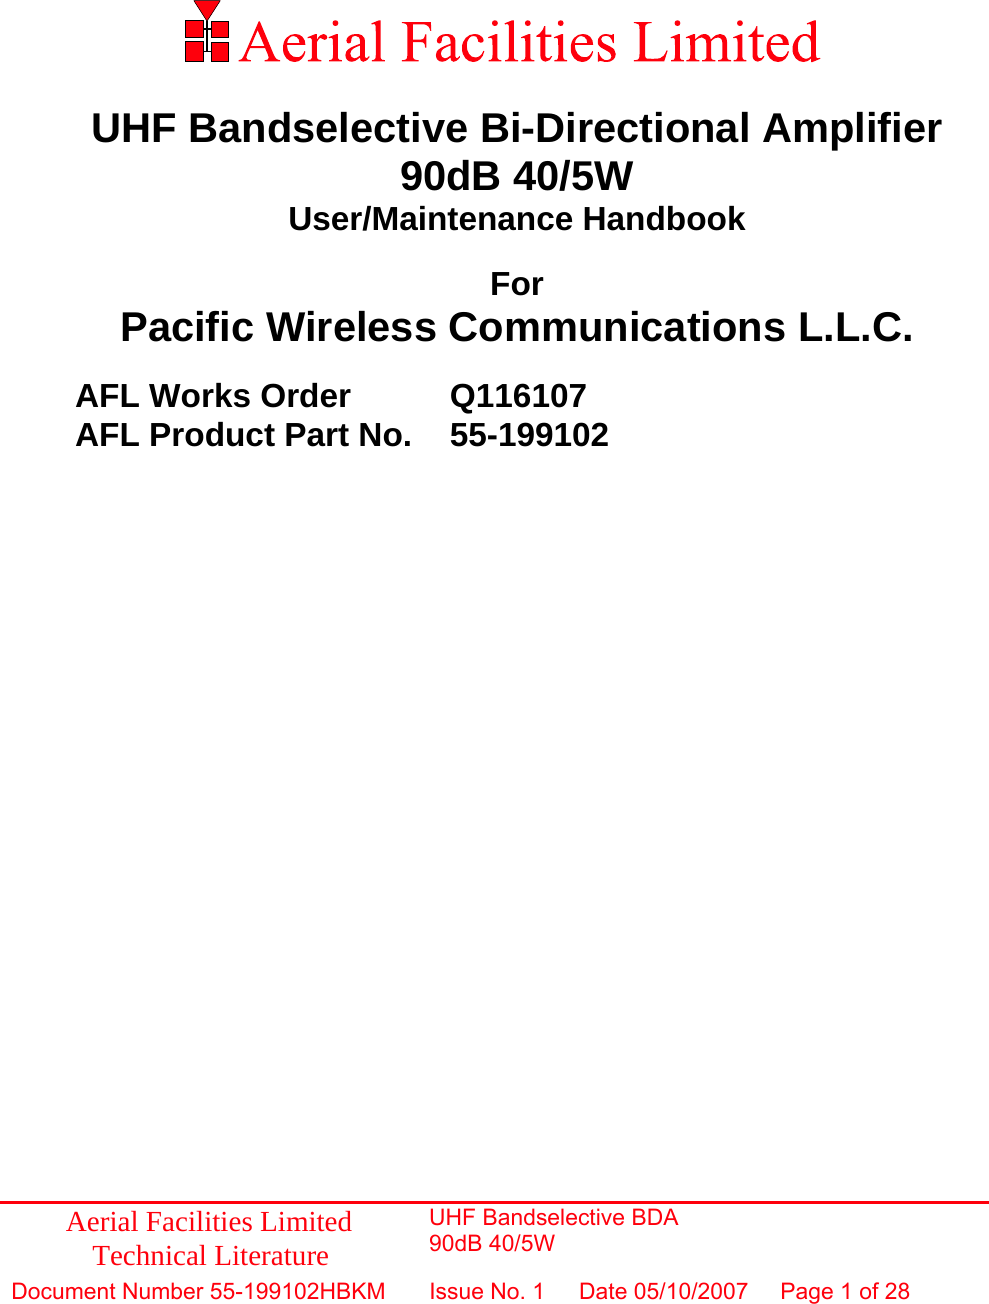                   UHF Bandselective Bi-Directional Amplifier 90dB 40/5W User/Maintenance Handbook  For Pacific Wireless Communications L.L.C.    AFL Works Order     Q116107   AFL Product Part No.   55-199102                Aerial Facilities Limited Technical Literature UHF Bandselective BDA 90dB 40/5W Document Number 55-199102HBKM  Issue No. 1  Date 05/10/2007  Page 1 of 28  